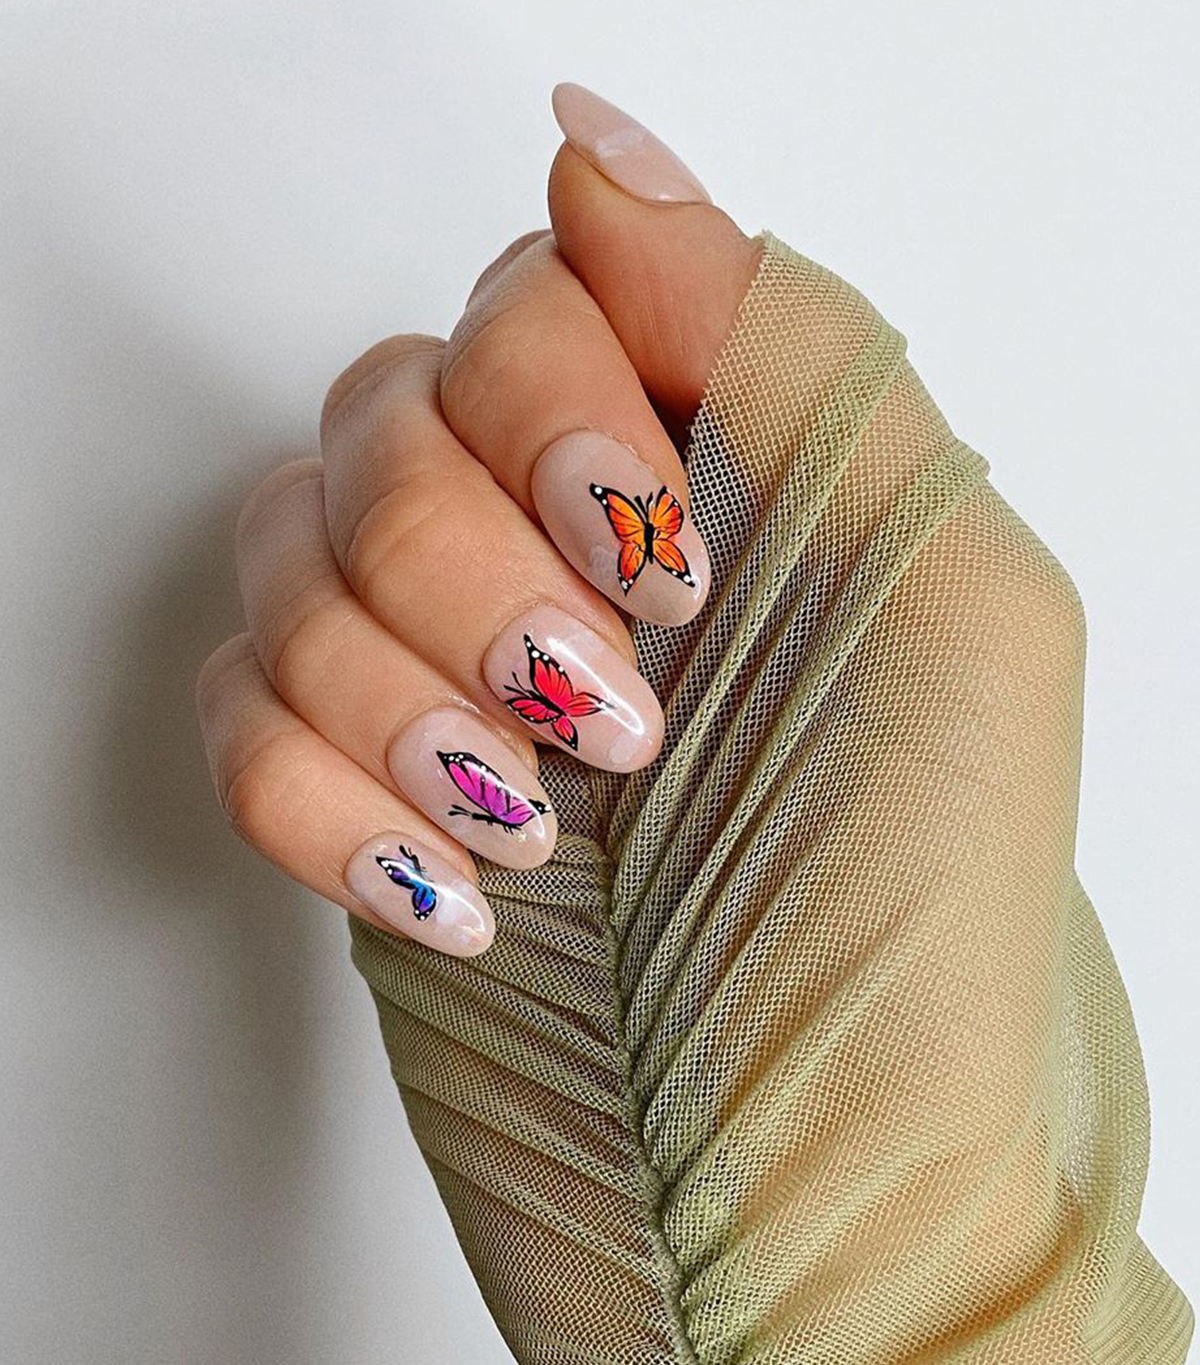 6 Easy, Summery Nail Art Designs That Only Look Complicated